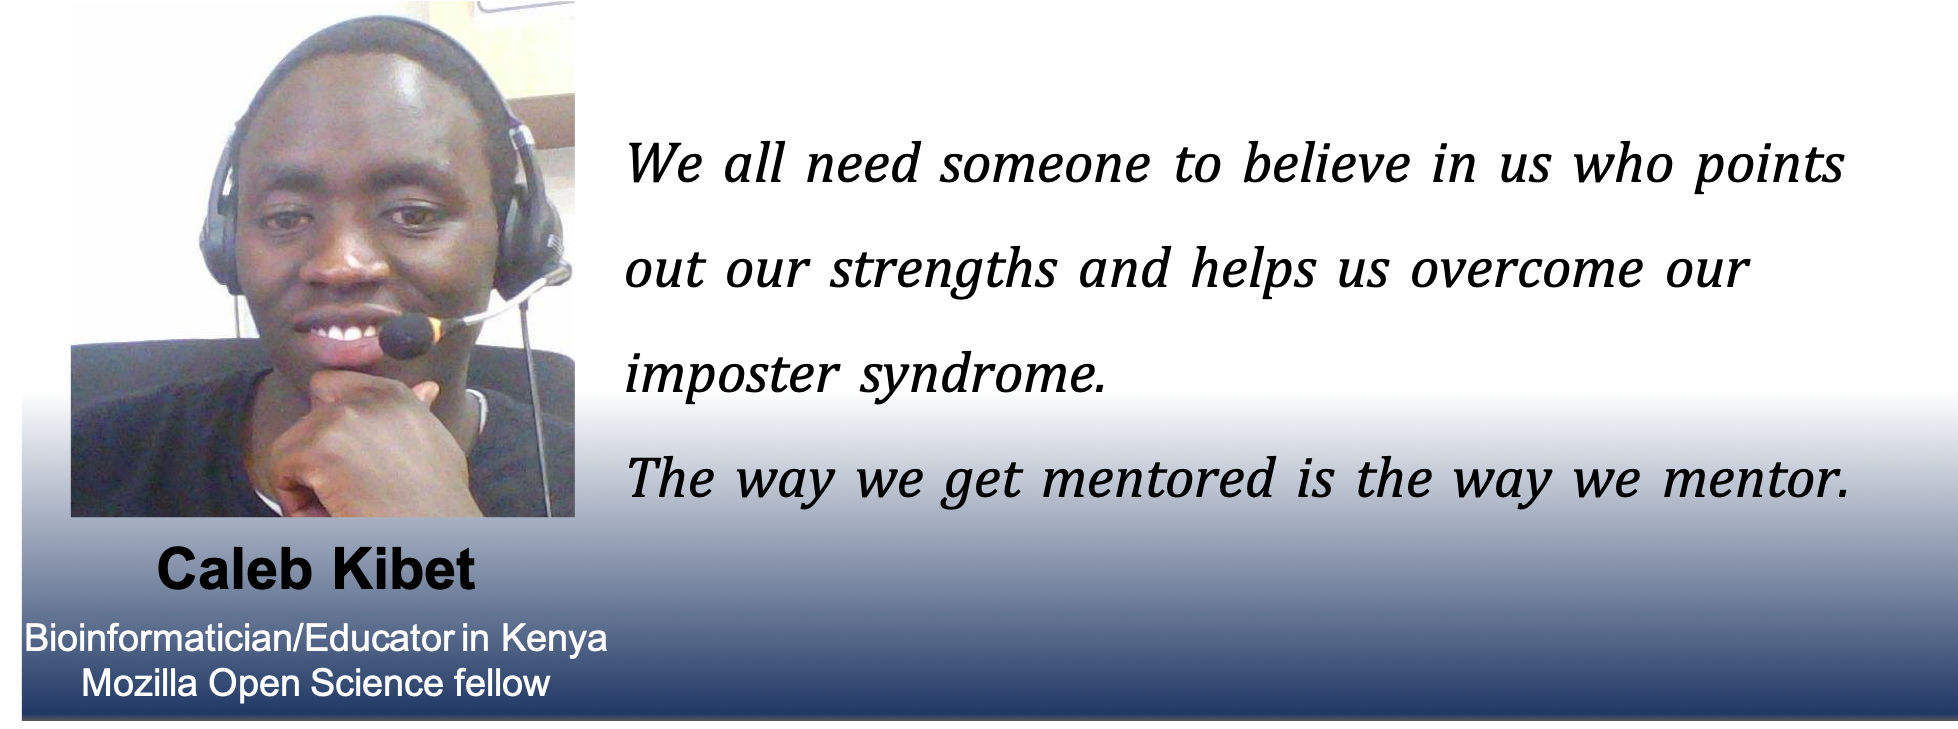 Picture of Caleb with the caption: We all need someone to believe in us who points out our strengths and helps us overcome out impostor syndrome. The way we get mentored is the way we mentor.